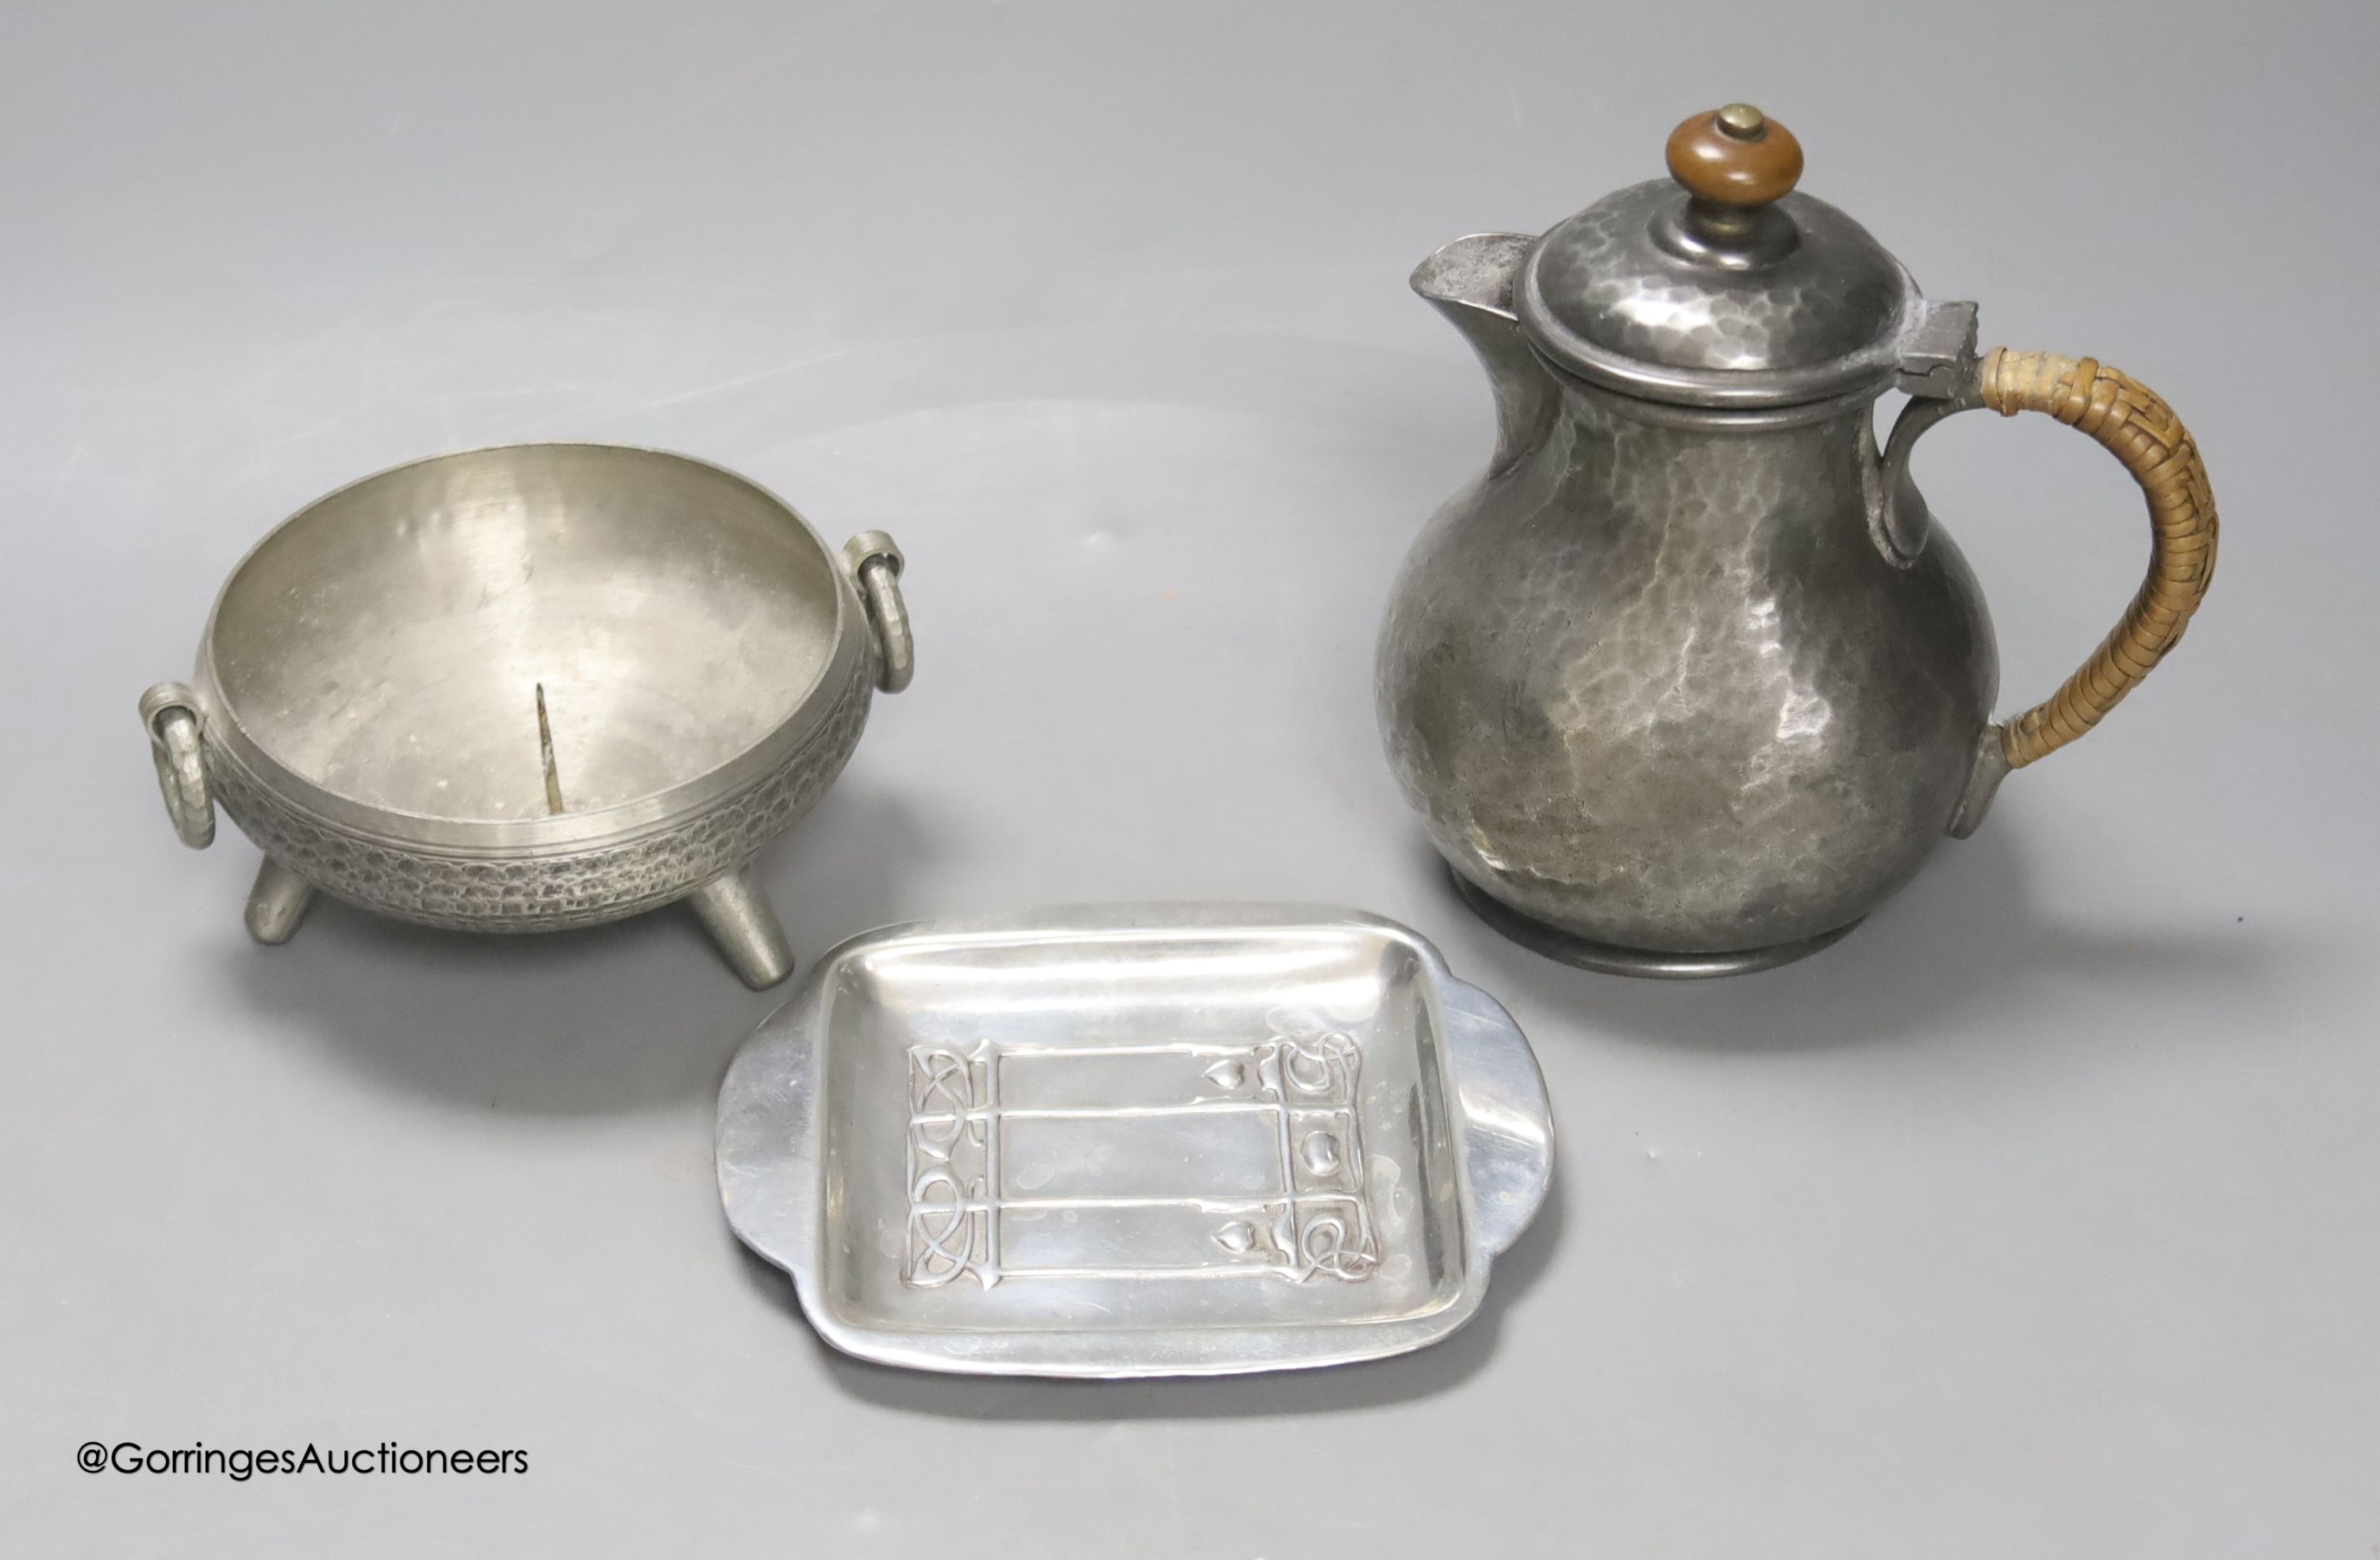 A Liberty & Co Tudric pewter pin dish, a Tudric covered jug and a pewter candleholder